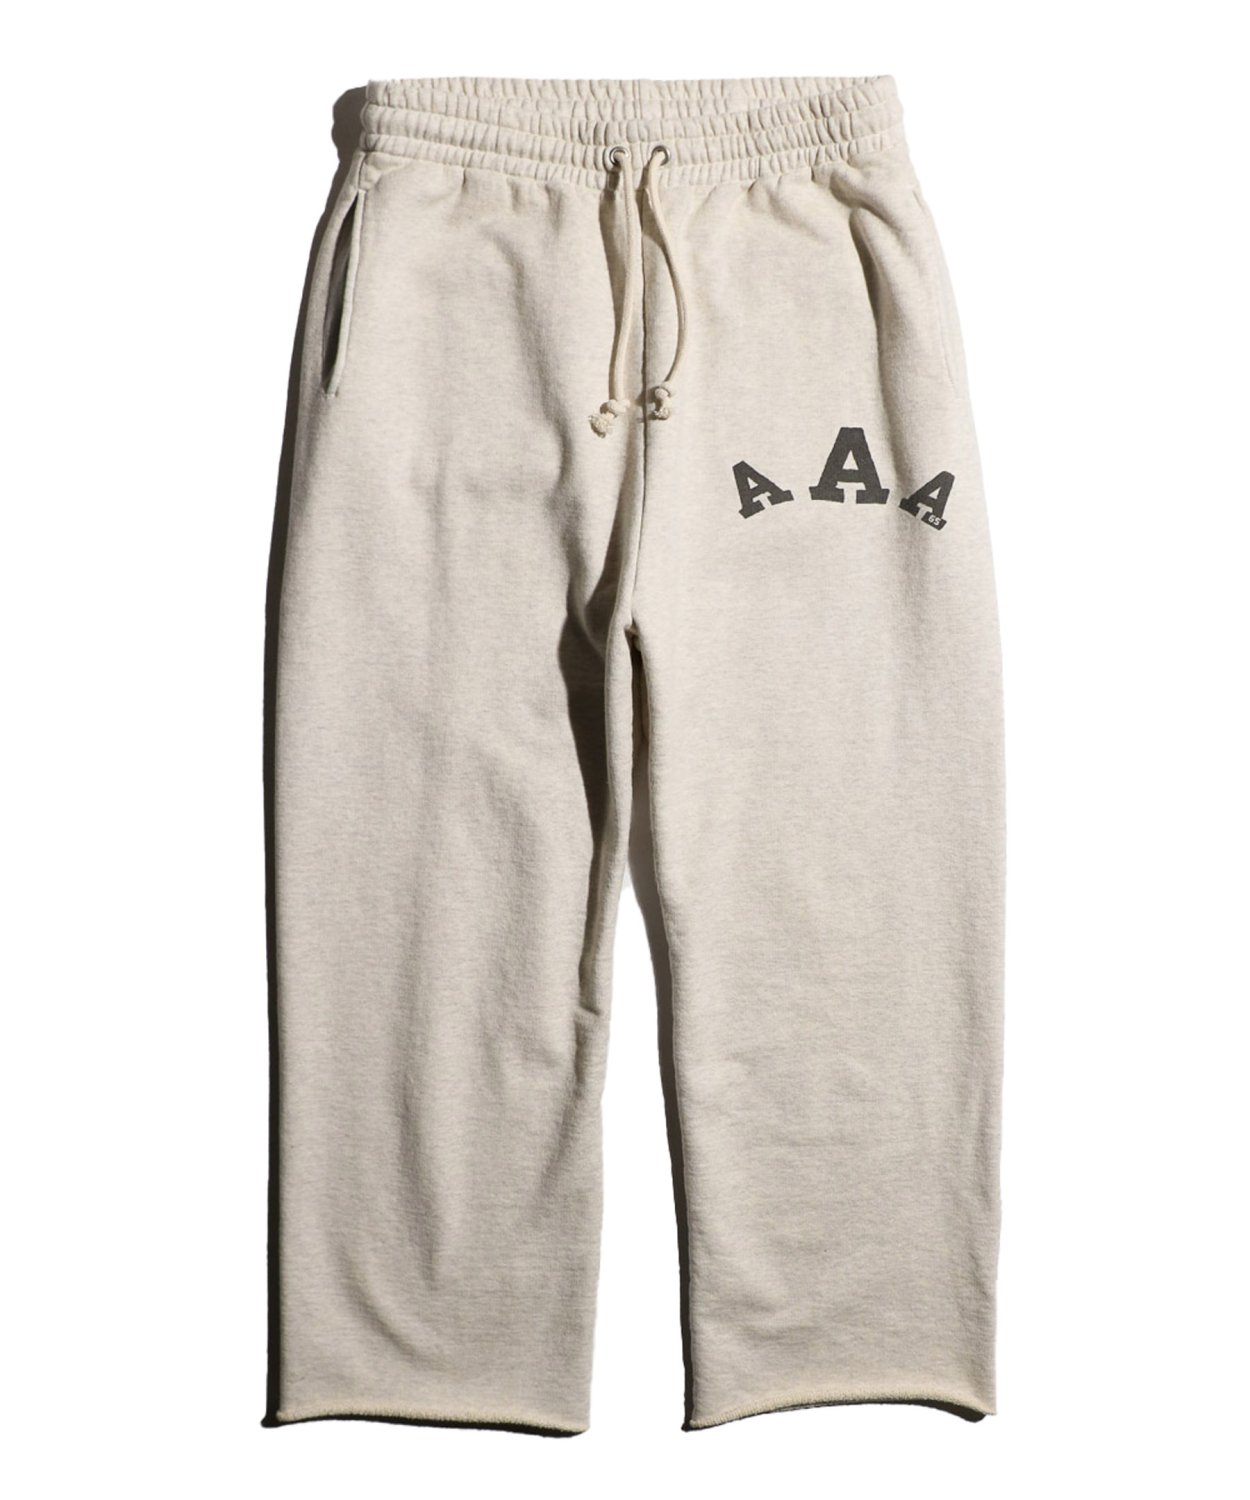 BOWWOW / ARMY ATHLETIC ASSOCIATION SWEAT PANT BW241-AAASP